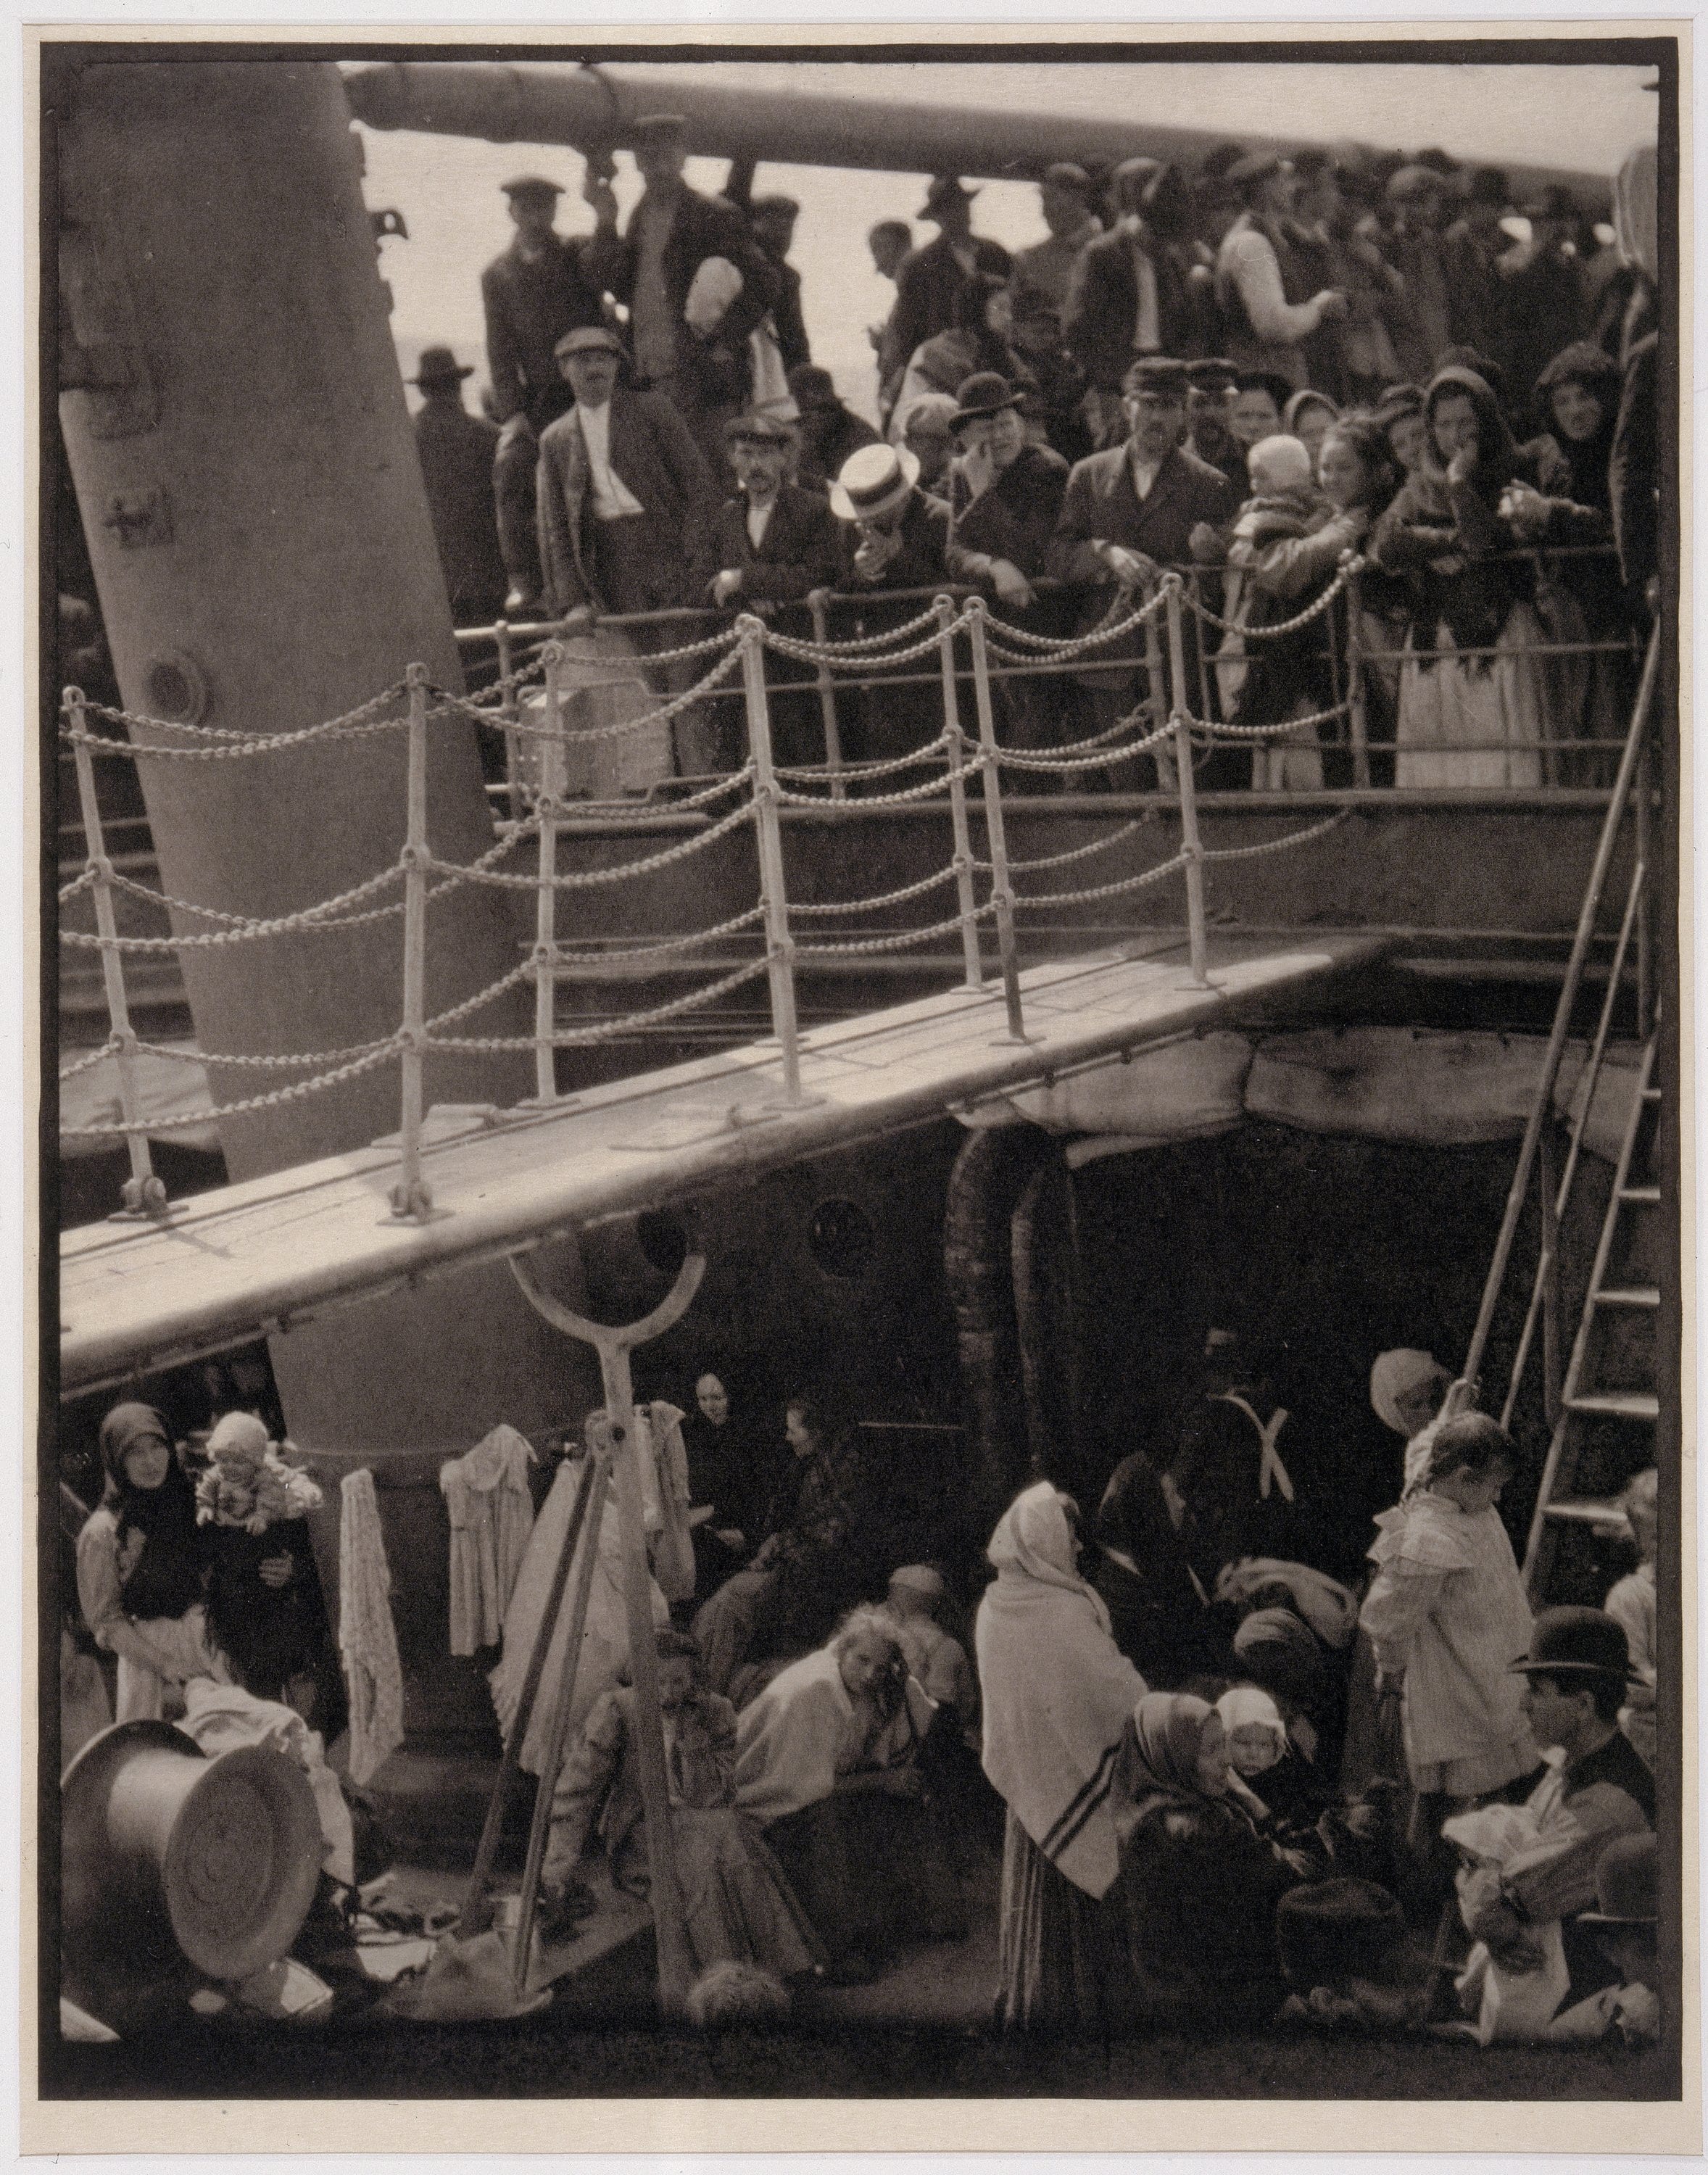 Exhibition Focused on Alfred Stieglitz's Iconic Work The Steerage Opens September 25, 2015